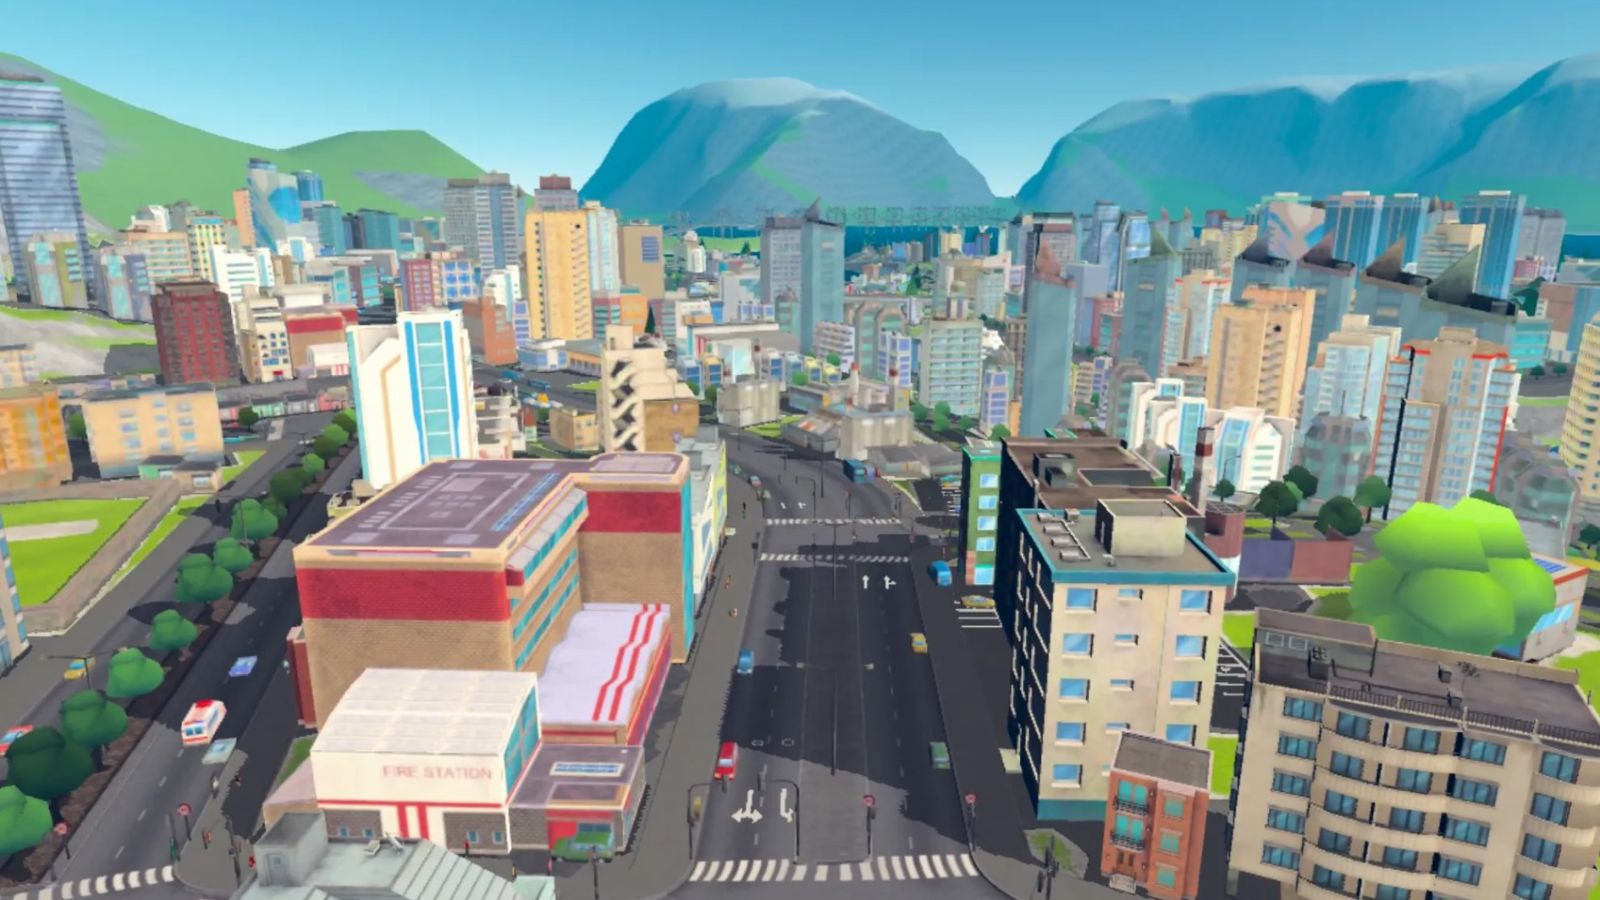 Cities: Skylines 2 - Official Gameplay Trailer